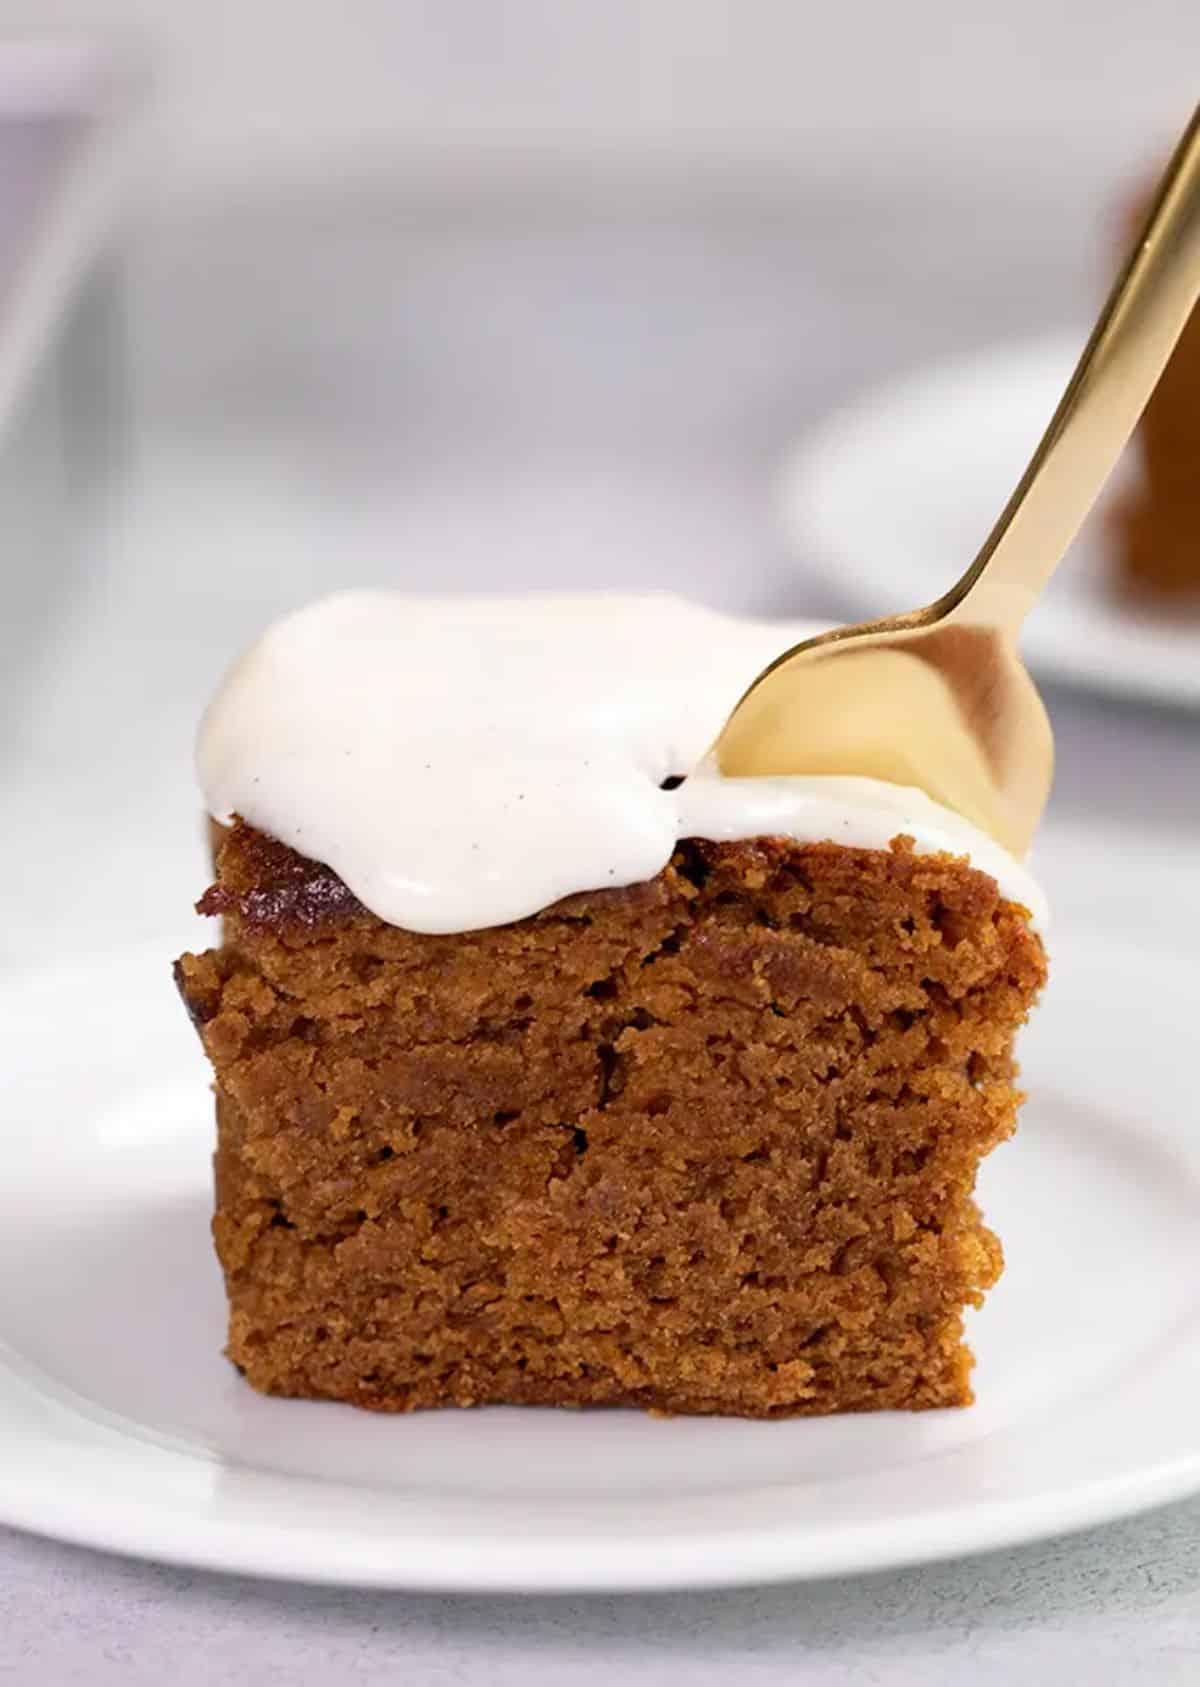 A piece of scrumptious Gluten-Free Gingerbread Cake on a white plate.